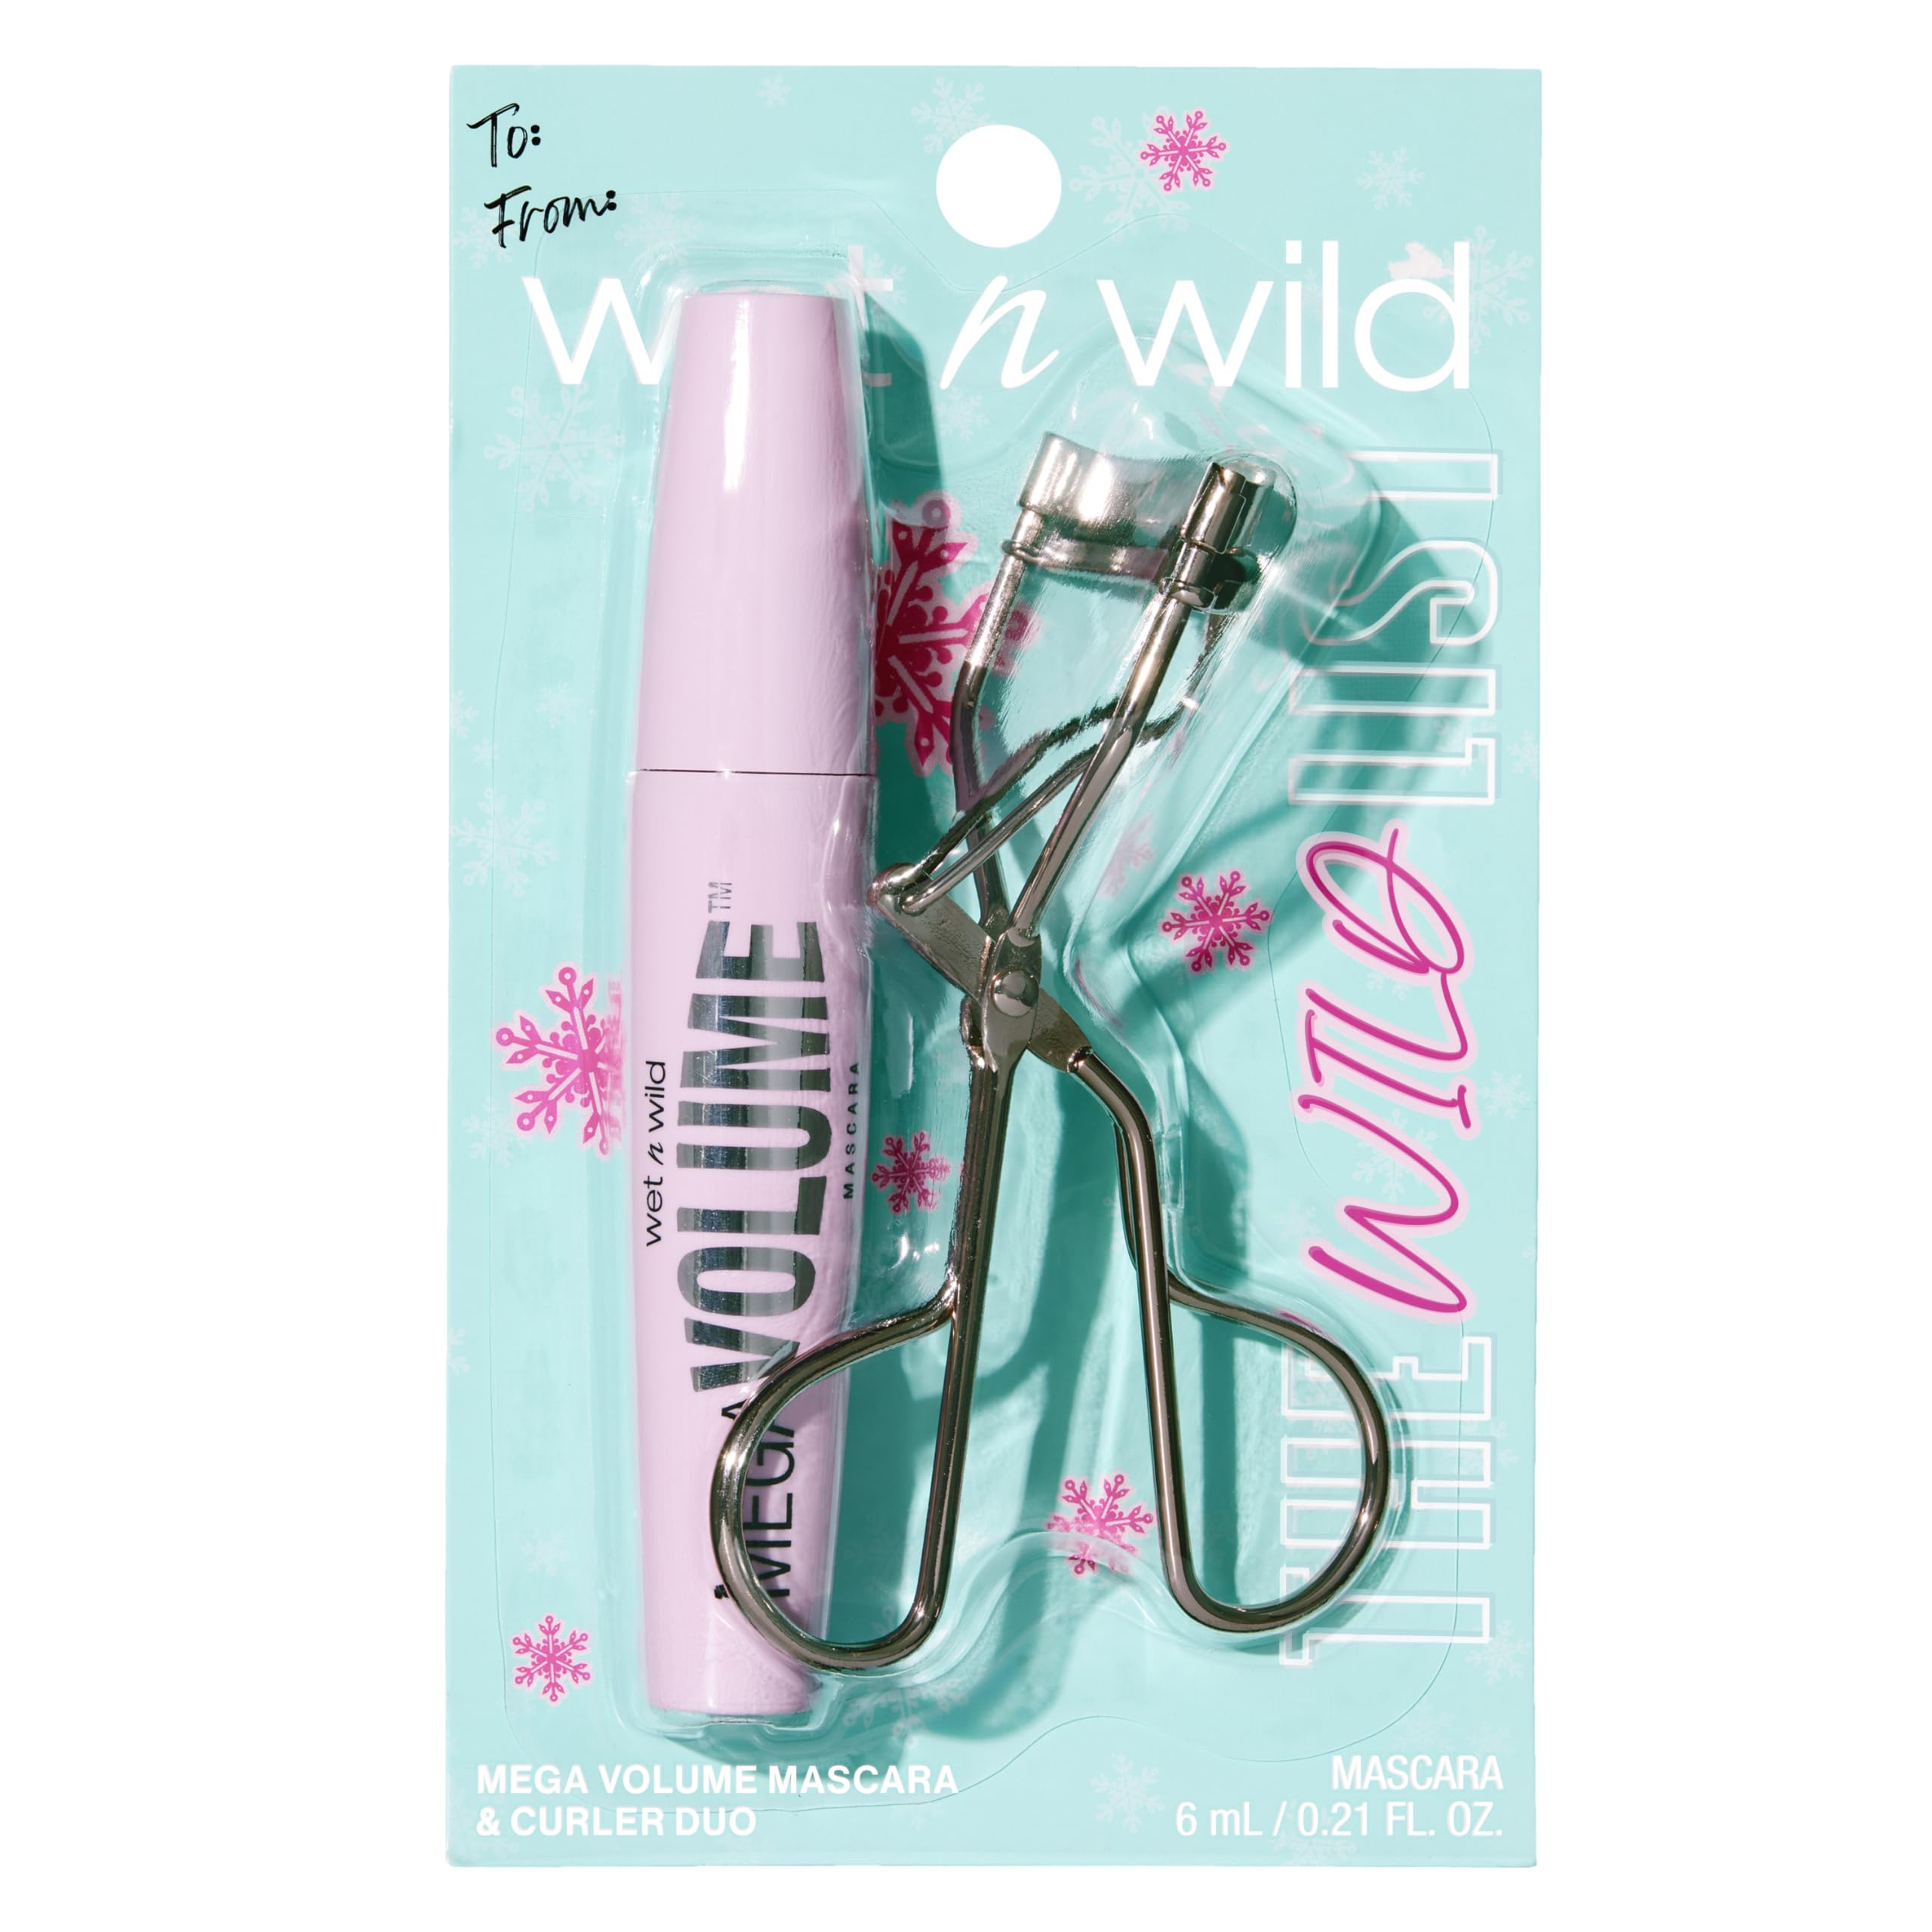 wet n wild The Wild List Mega Volume Mascara and Curler Duo | Holiday Gift Sets | Stocking Stuffers